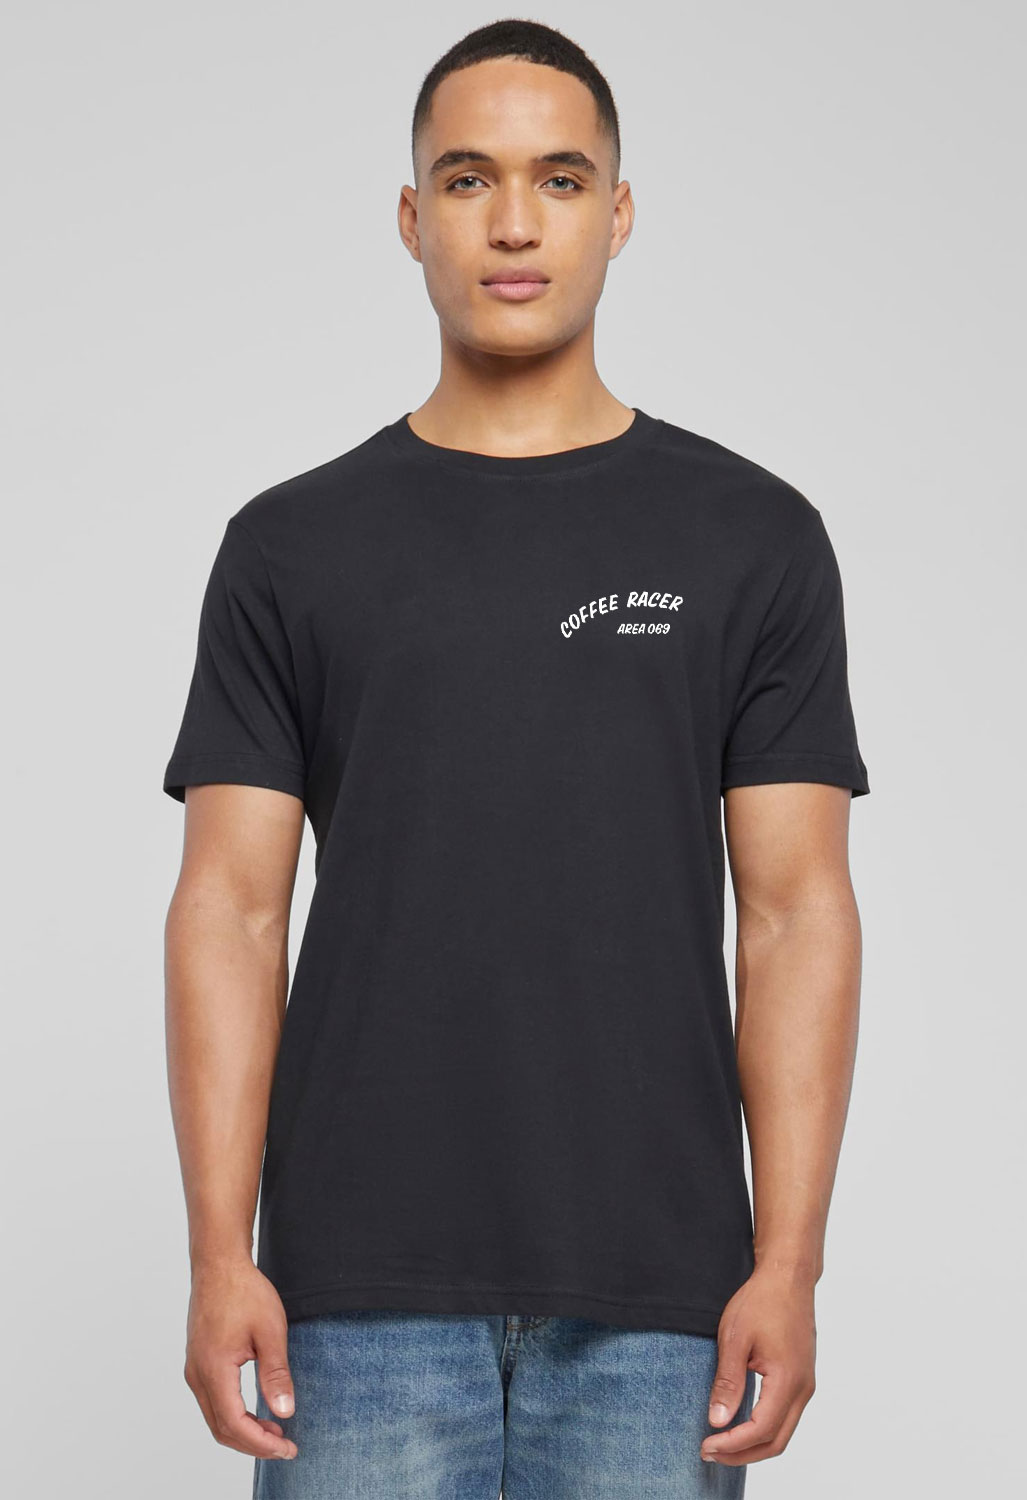 OV-Style CoffeeRacer Cup Shirt Black